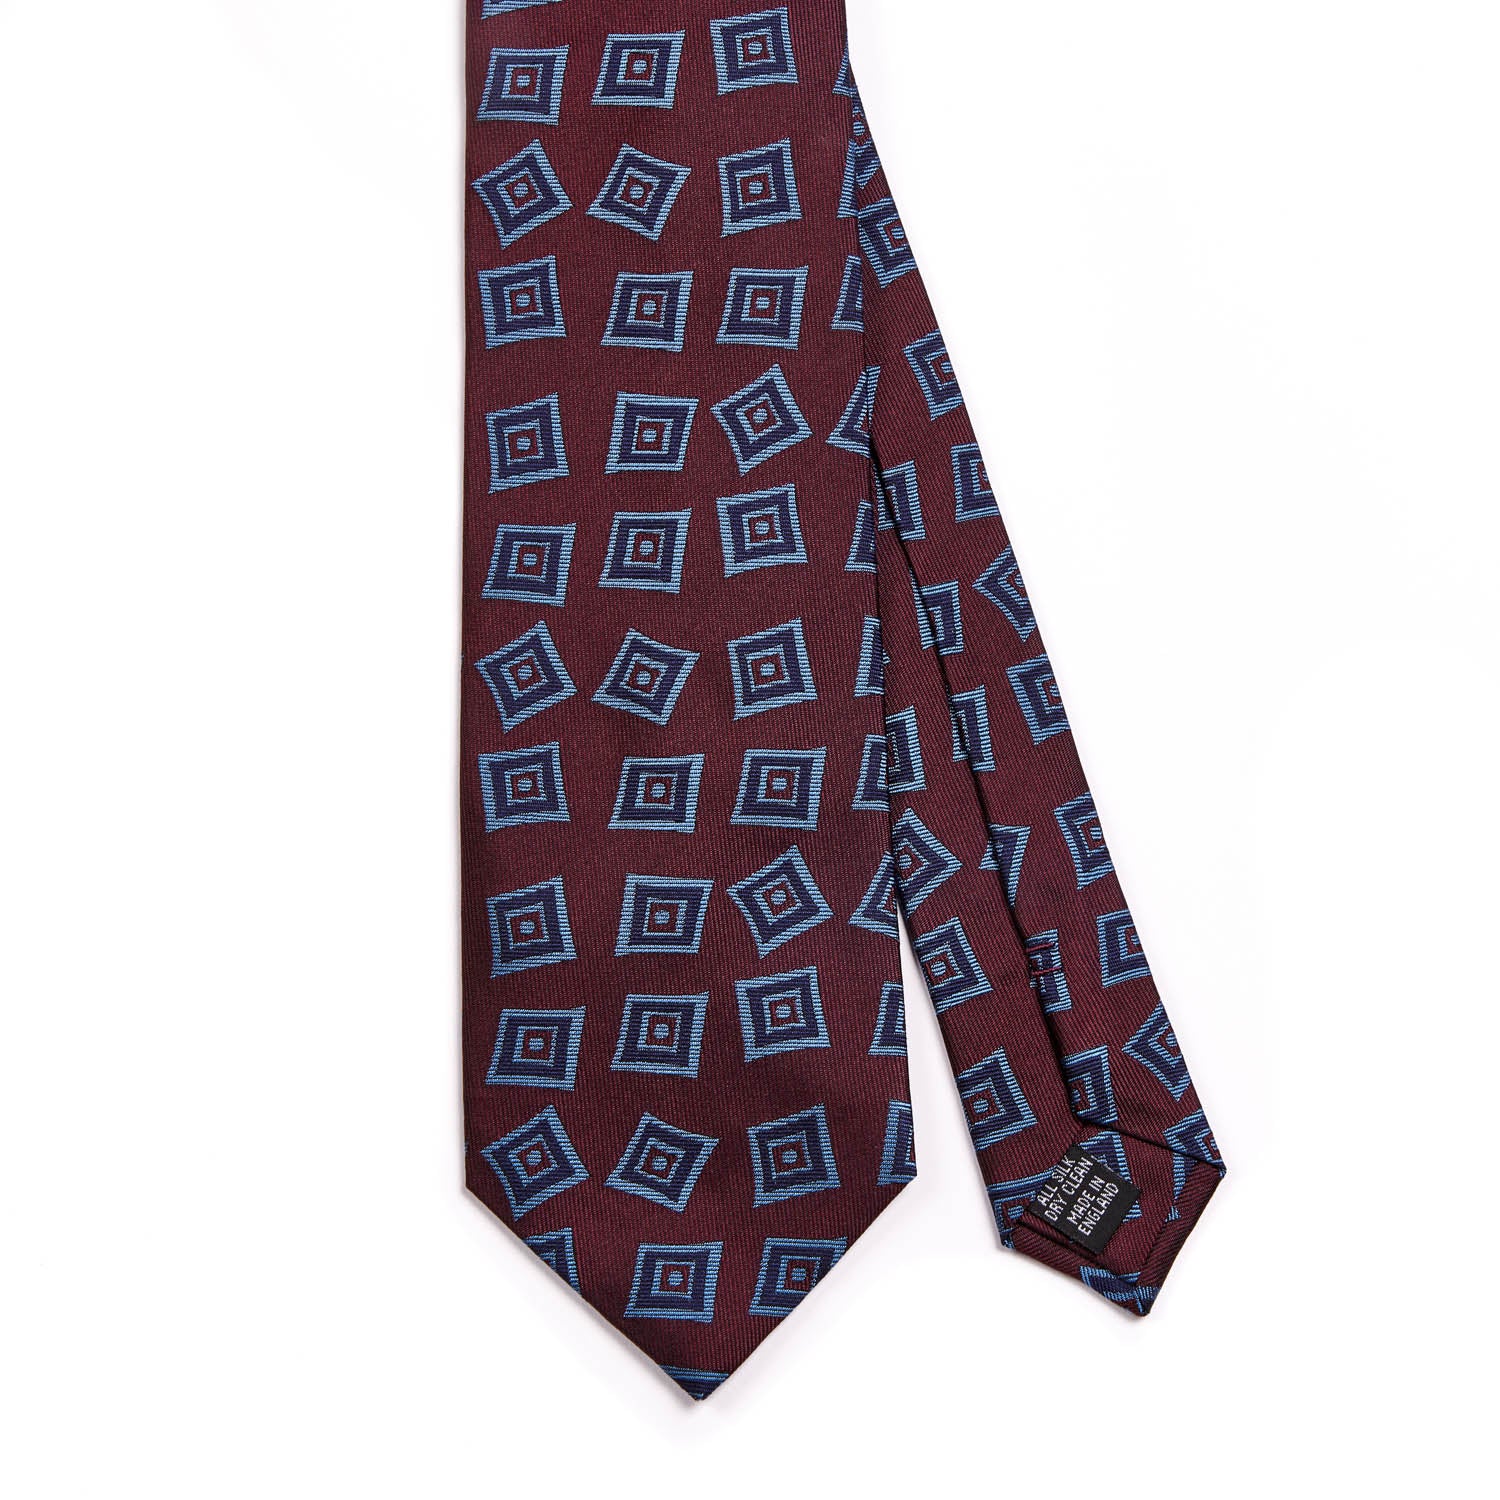 A Sovereign Grade Oxblood Art Deco Jacquard Tie, 150 cm with blue squares on it, crafted with quality in the United Kingdom, by KirbyAllison.com.